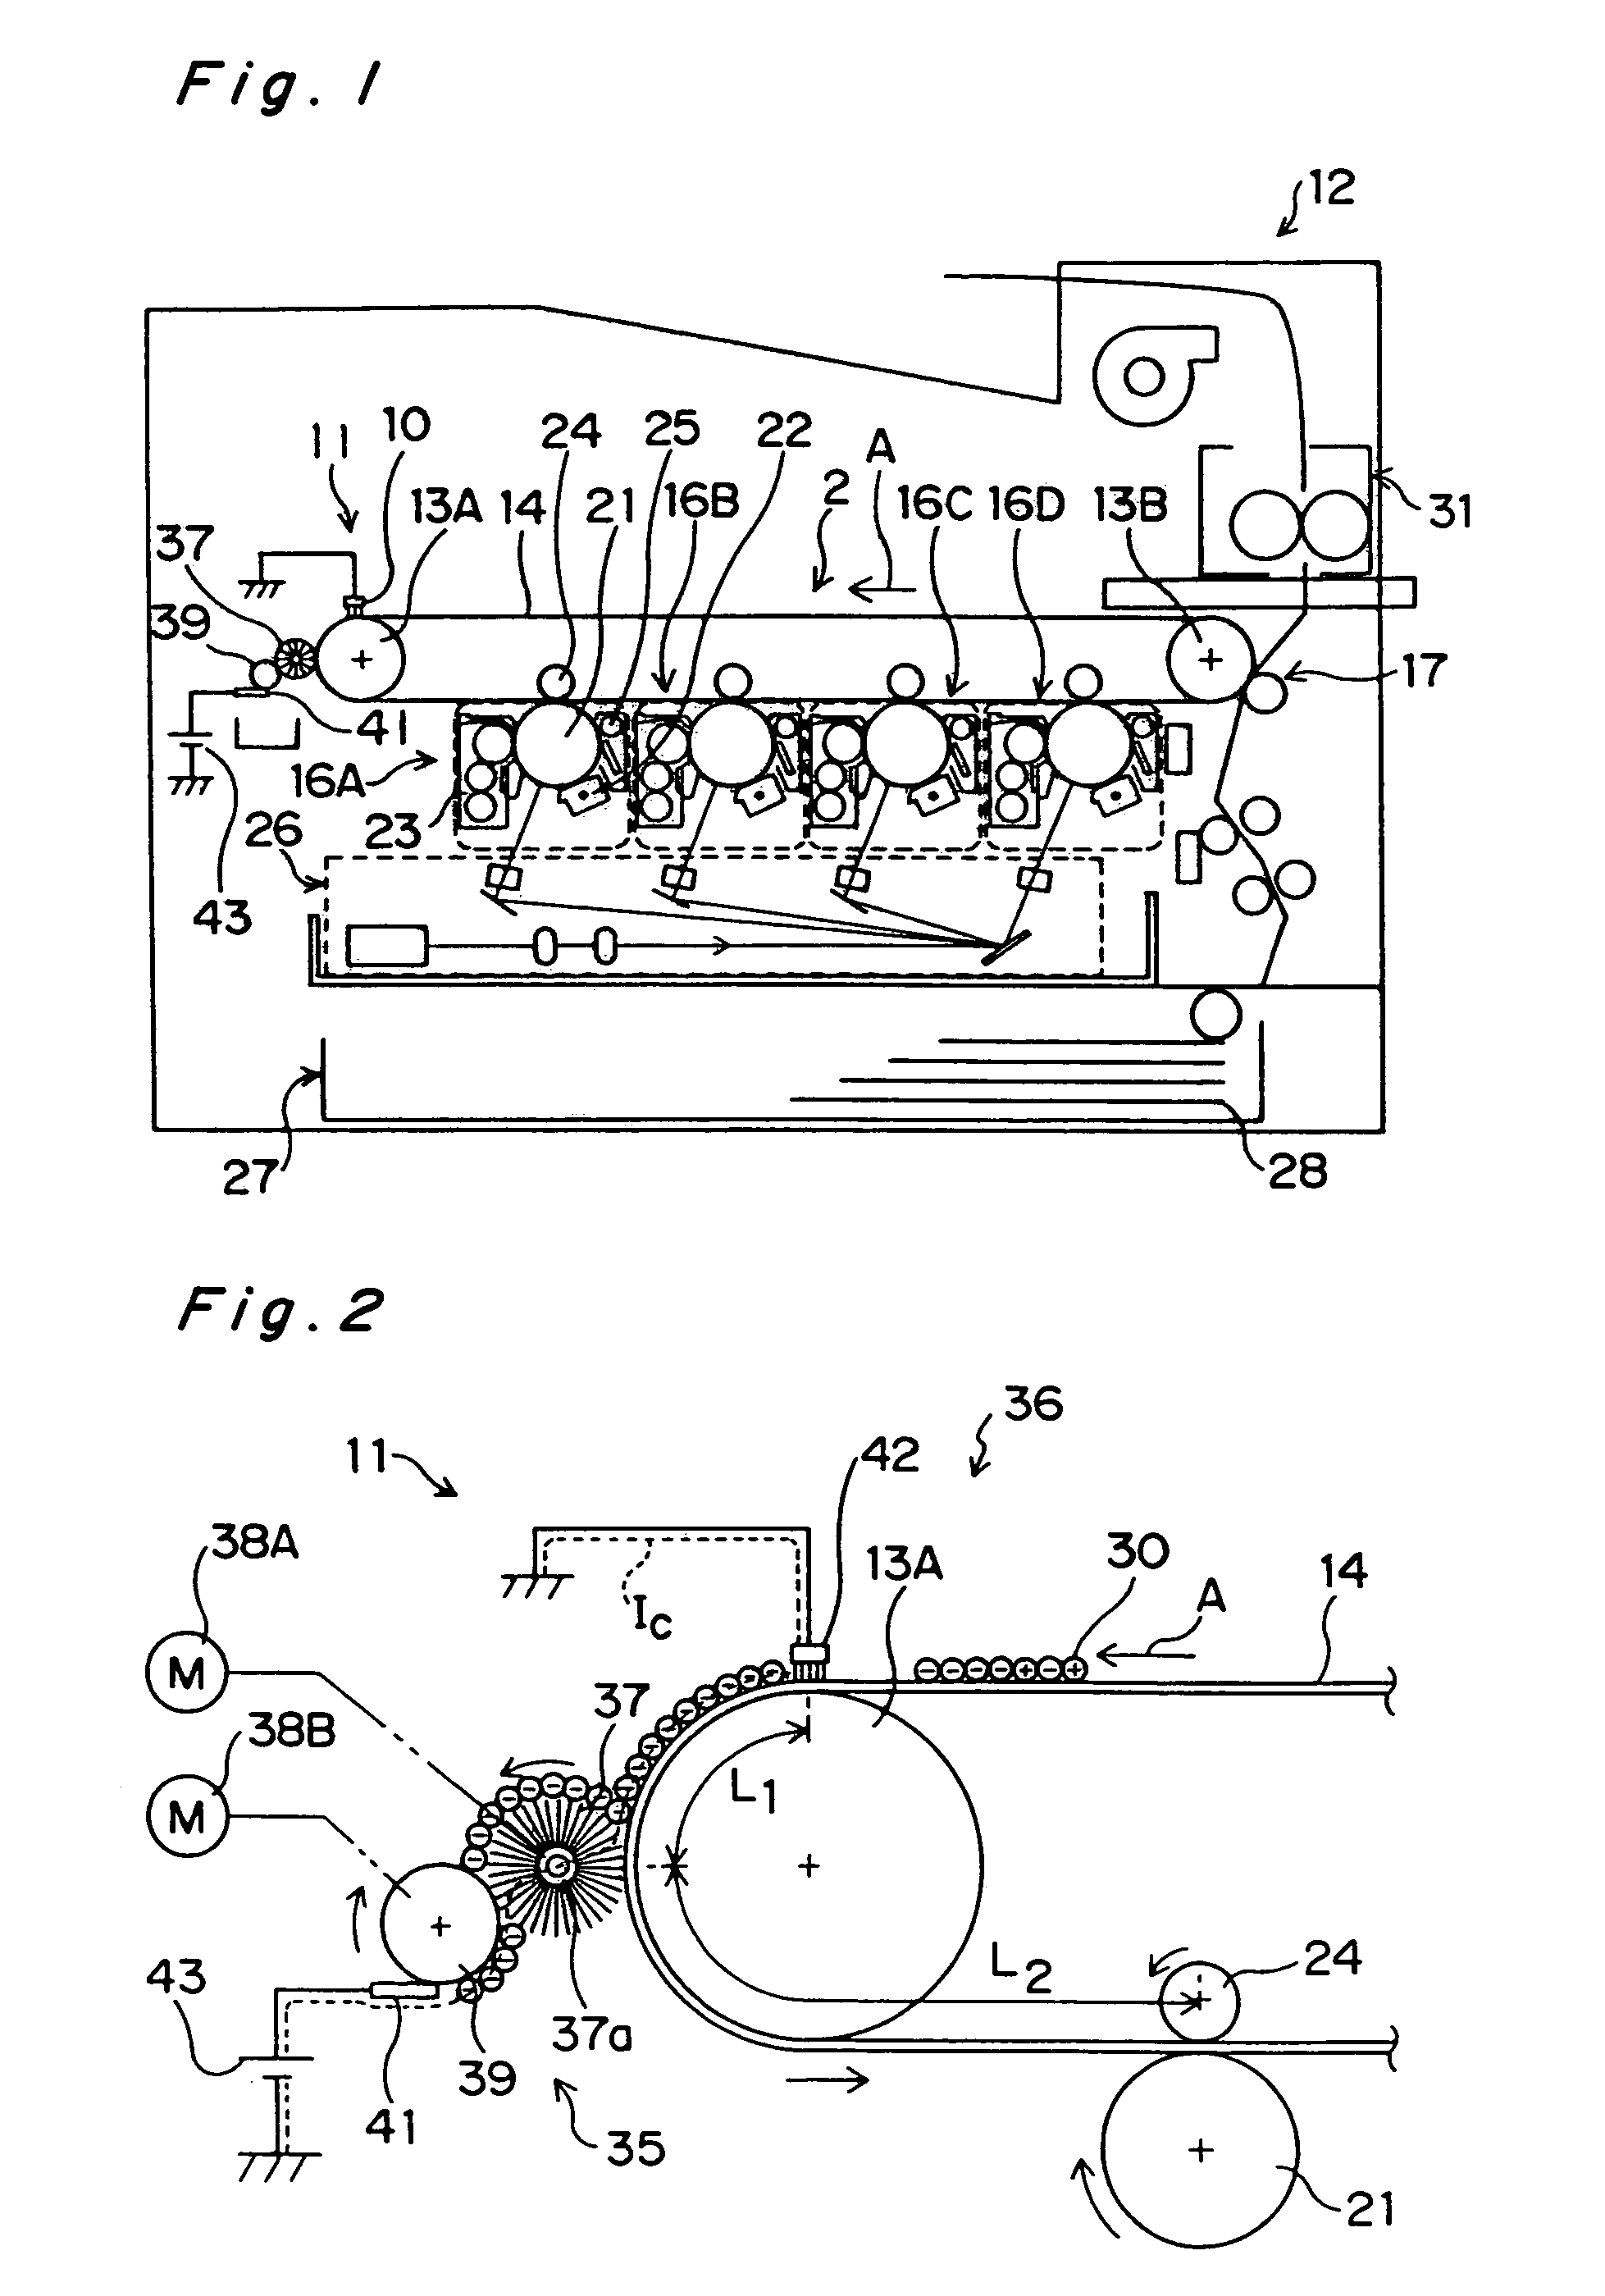 Cleaning device for collecting toner on a surface of an image forming apparatus